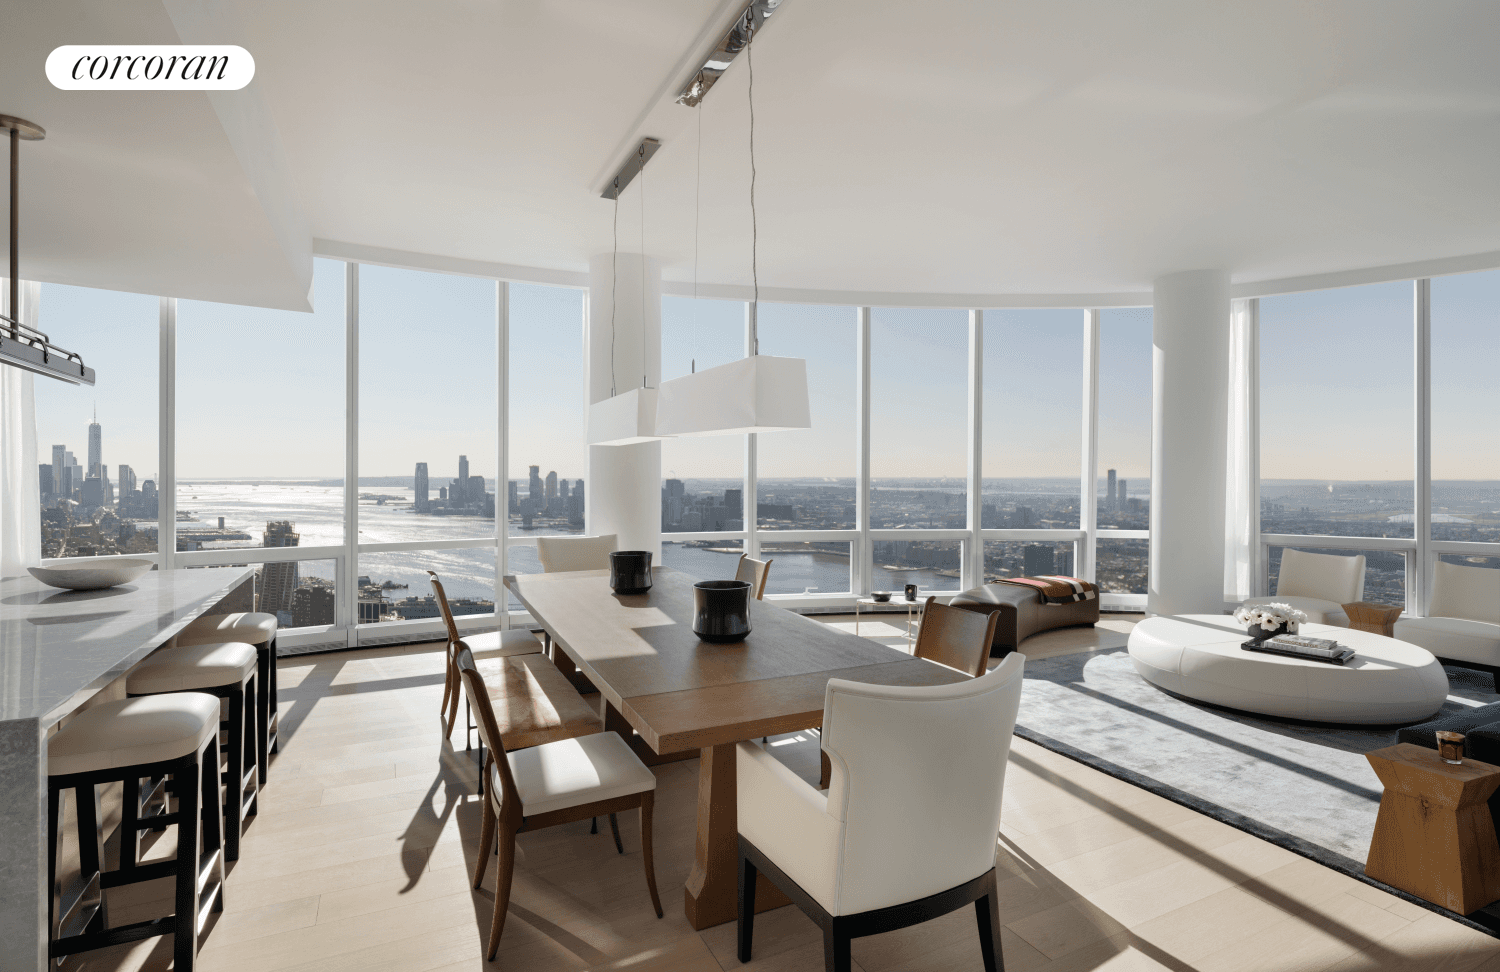 PRIME SOUTHWEST CORNER PENTHOUSE WITH SPECTACULAR VIEWS OF THE HUDSON RIVER, NEW YORK HARBOR, FREEDOM TOWER AND STATUE OF LIBERTY.